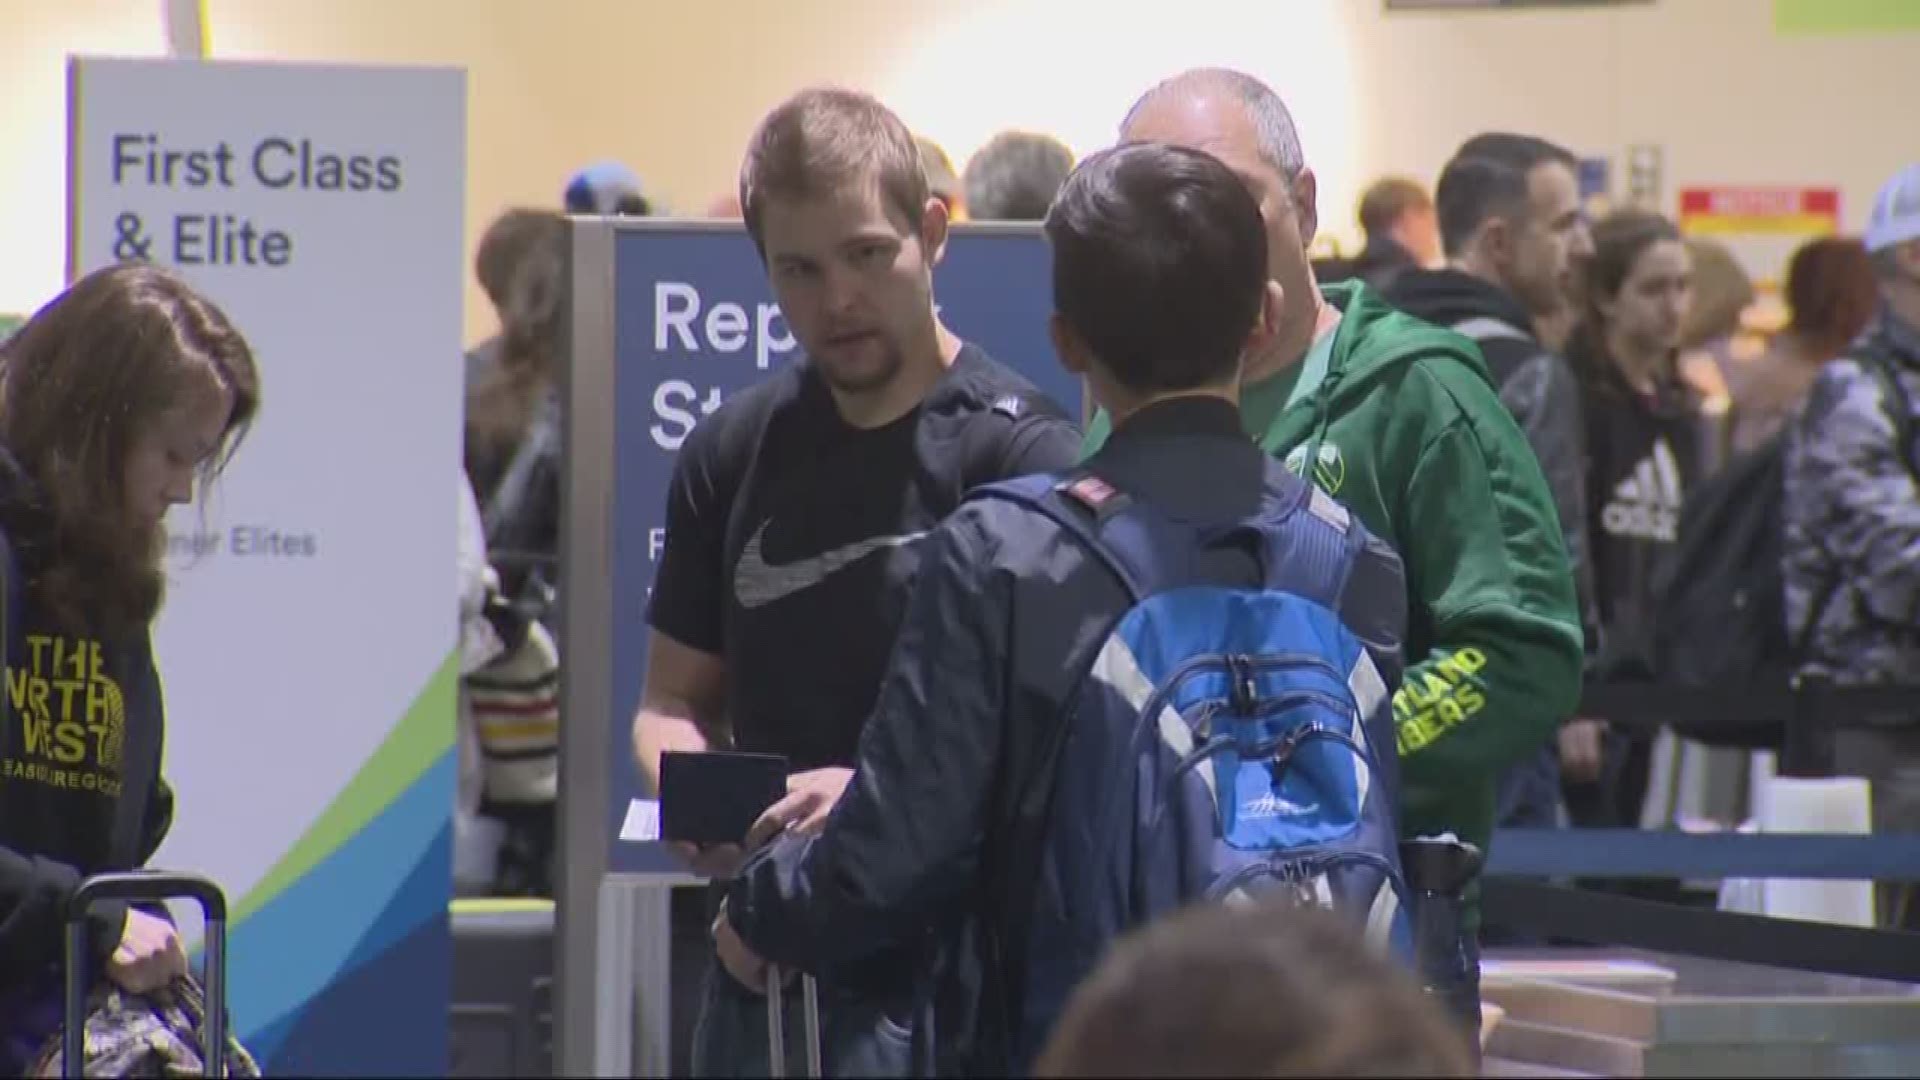 Portland International Airport is in for a busy week with Spring Break